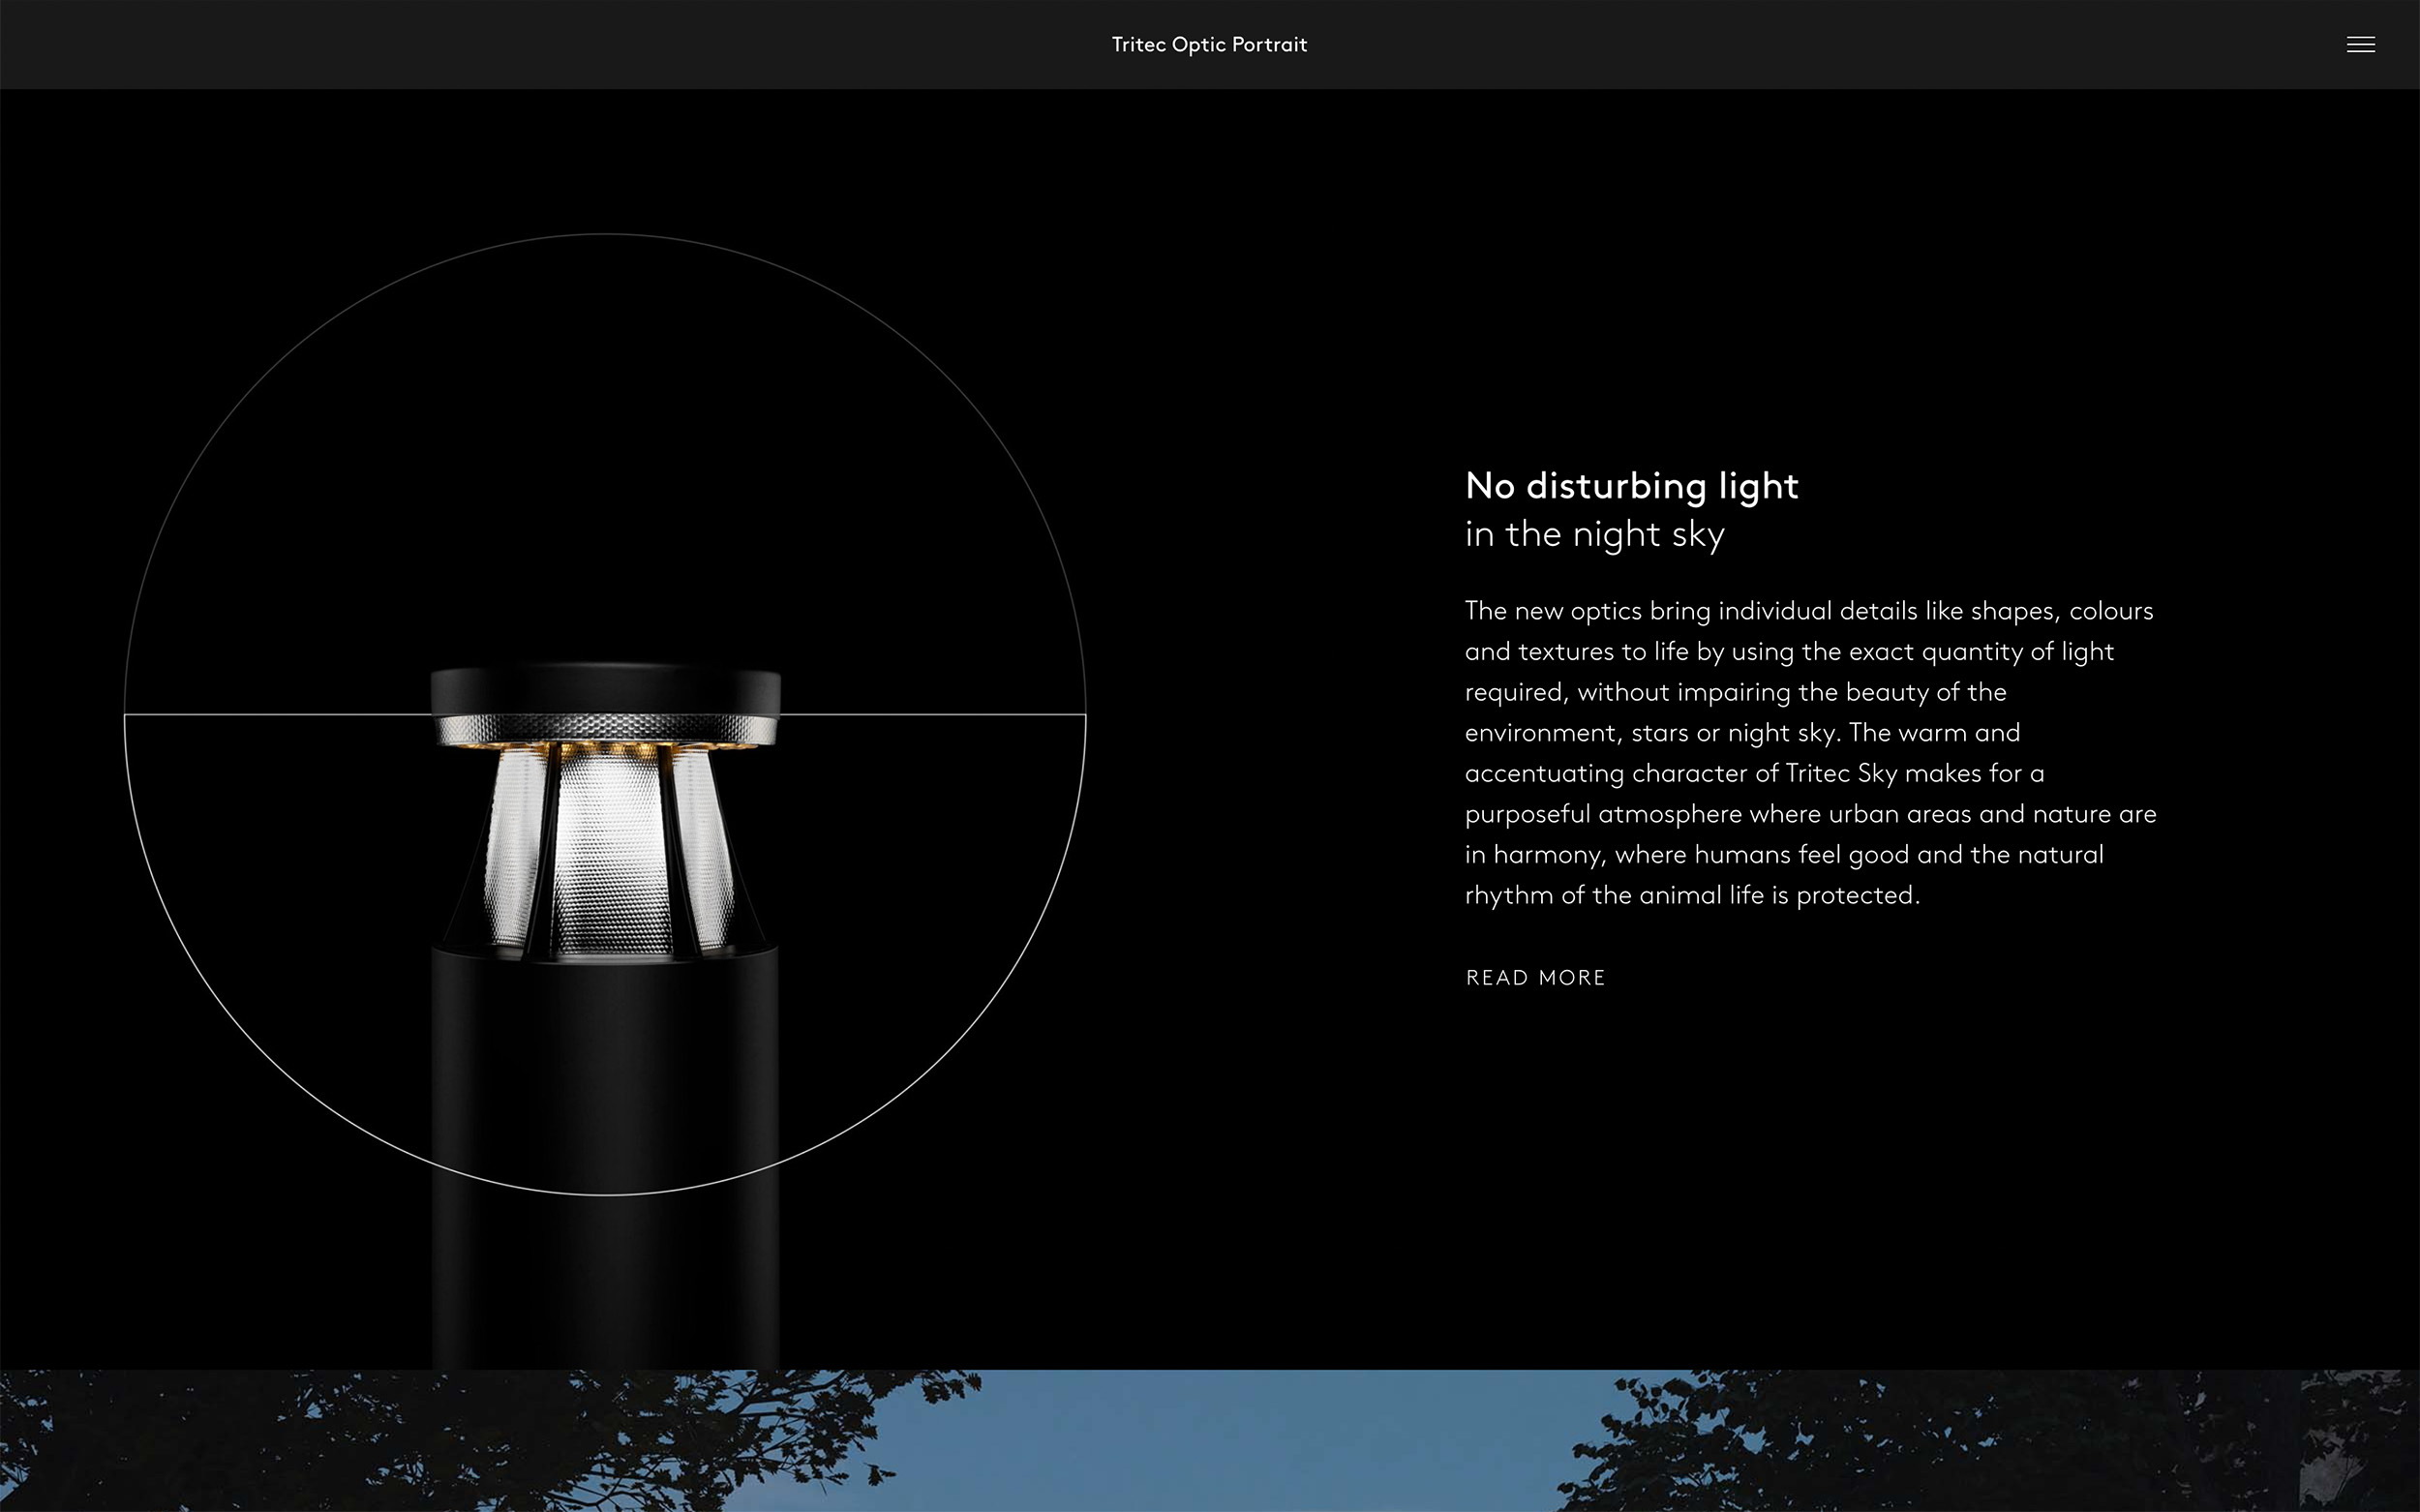 An image showcasing Tritec Optic Portrait page with an illustration of the luminaire and features side by side.